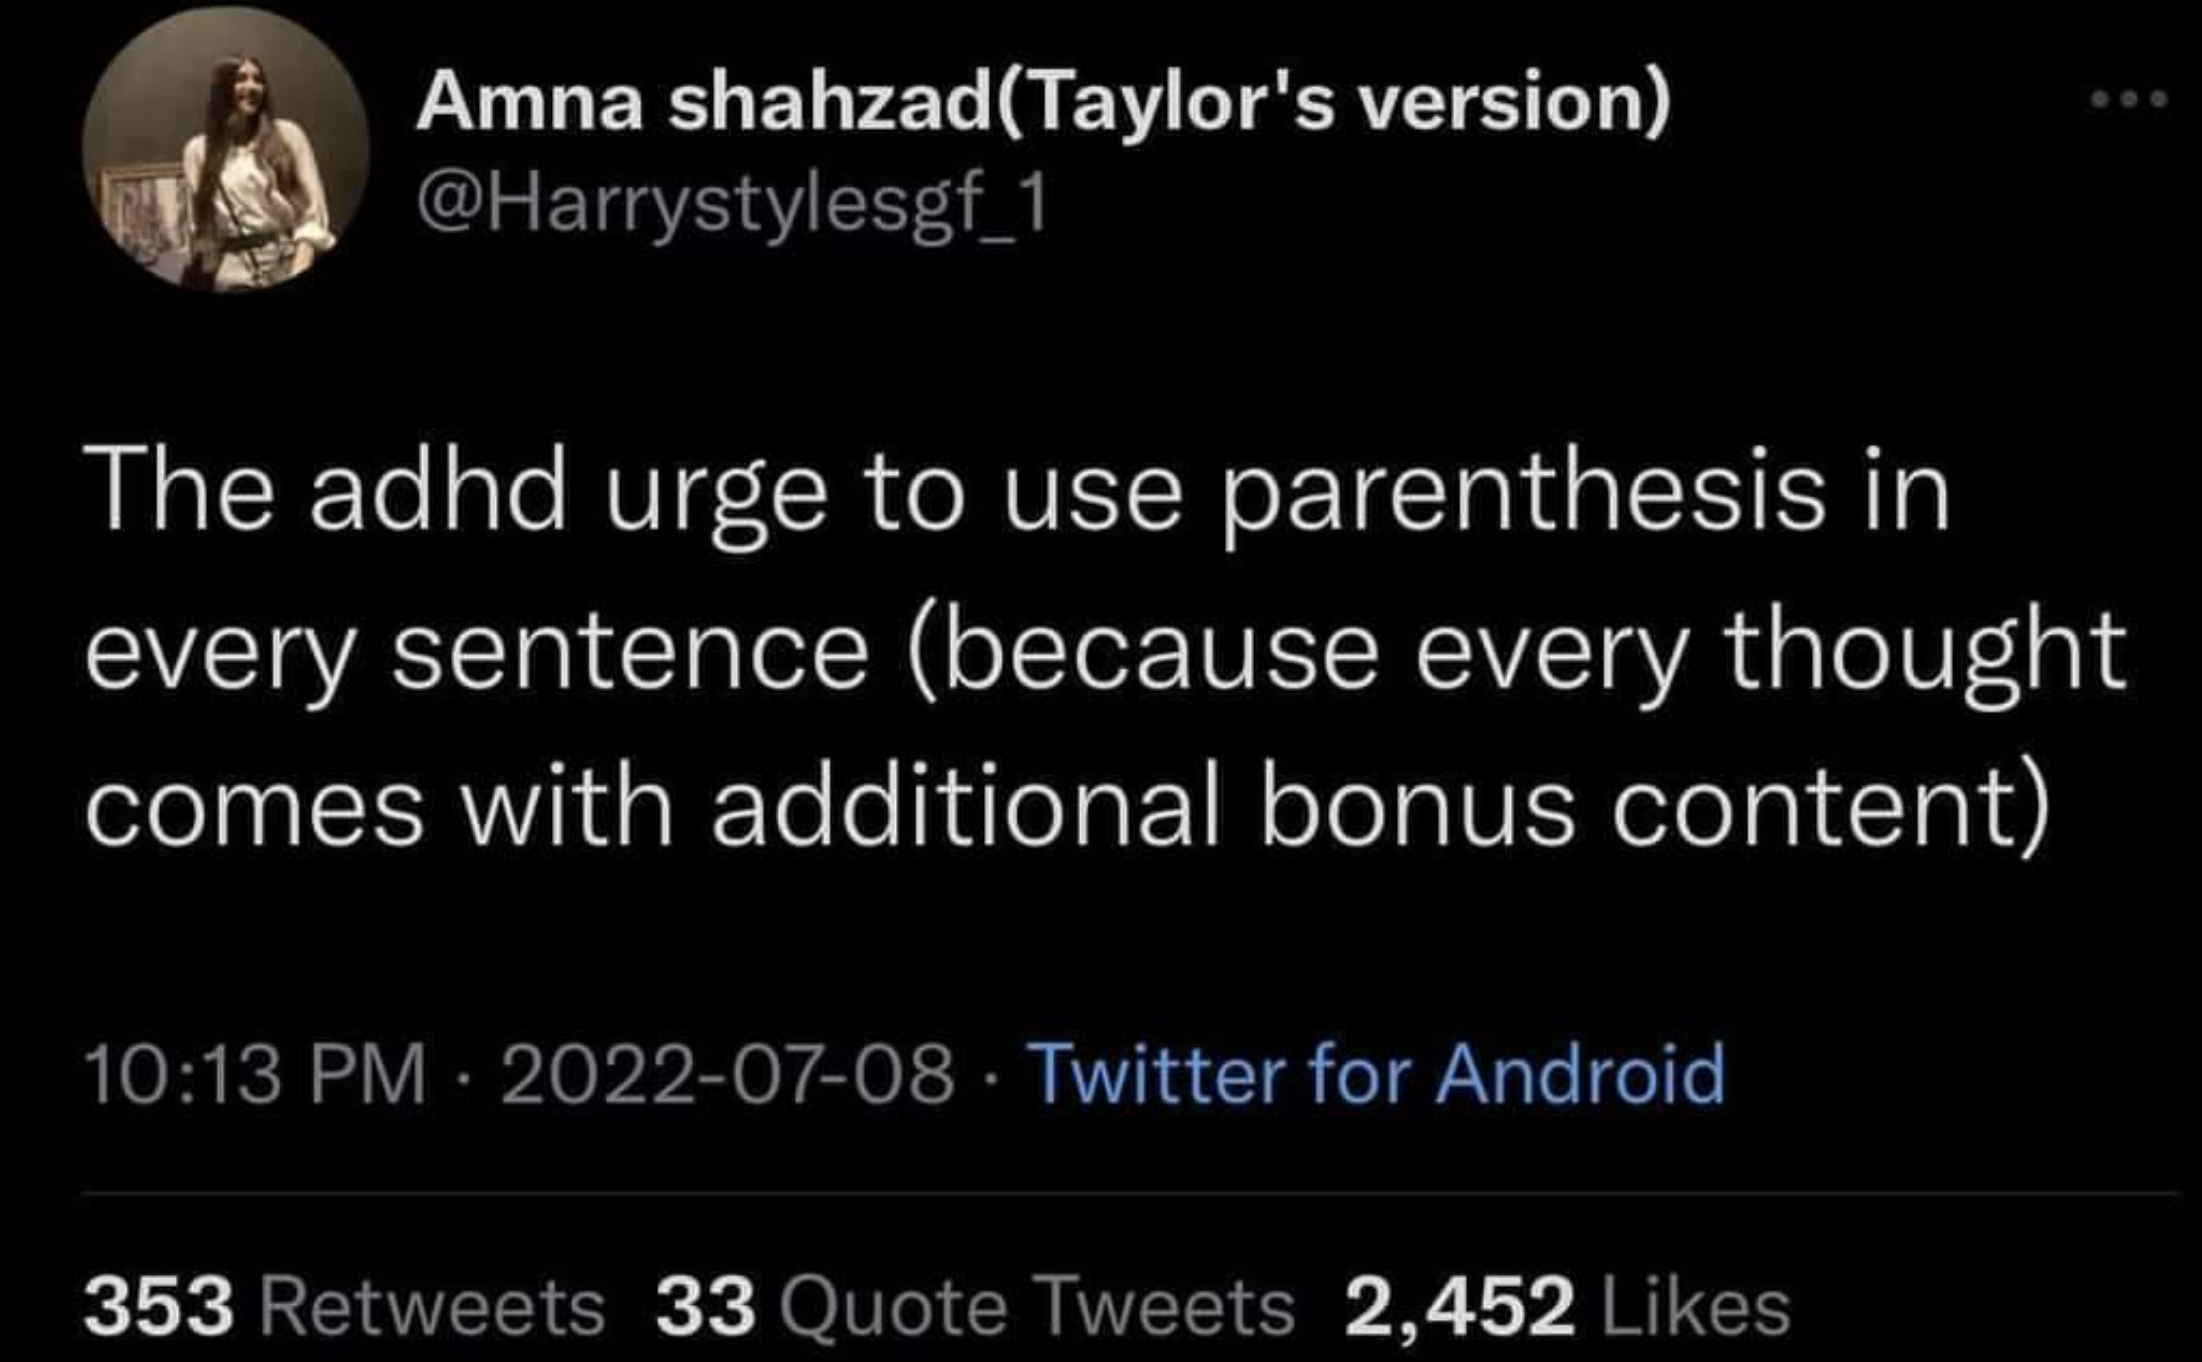 screenshot - Amna shahzadTaylor's version The adhd urge to use parenthesis in every sentence because every thought comes with additional bonus content Twitter for Android 353 33 Quote Tweets 2,452